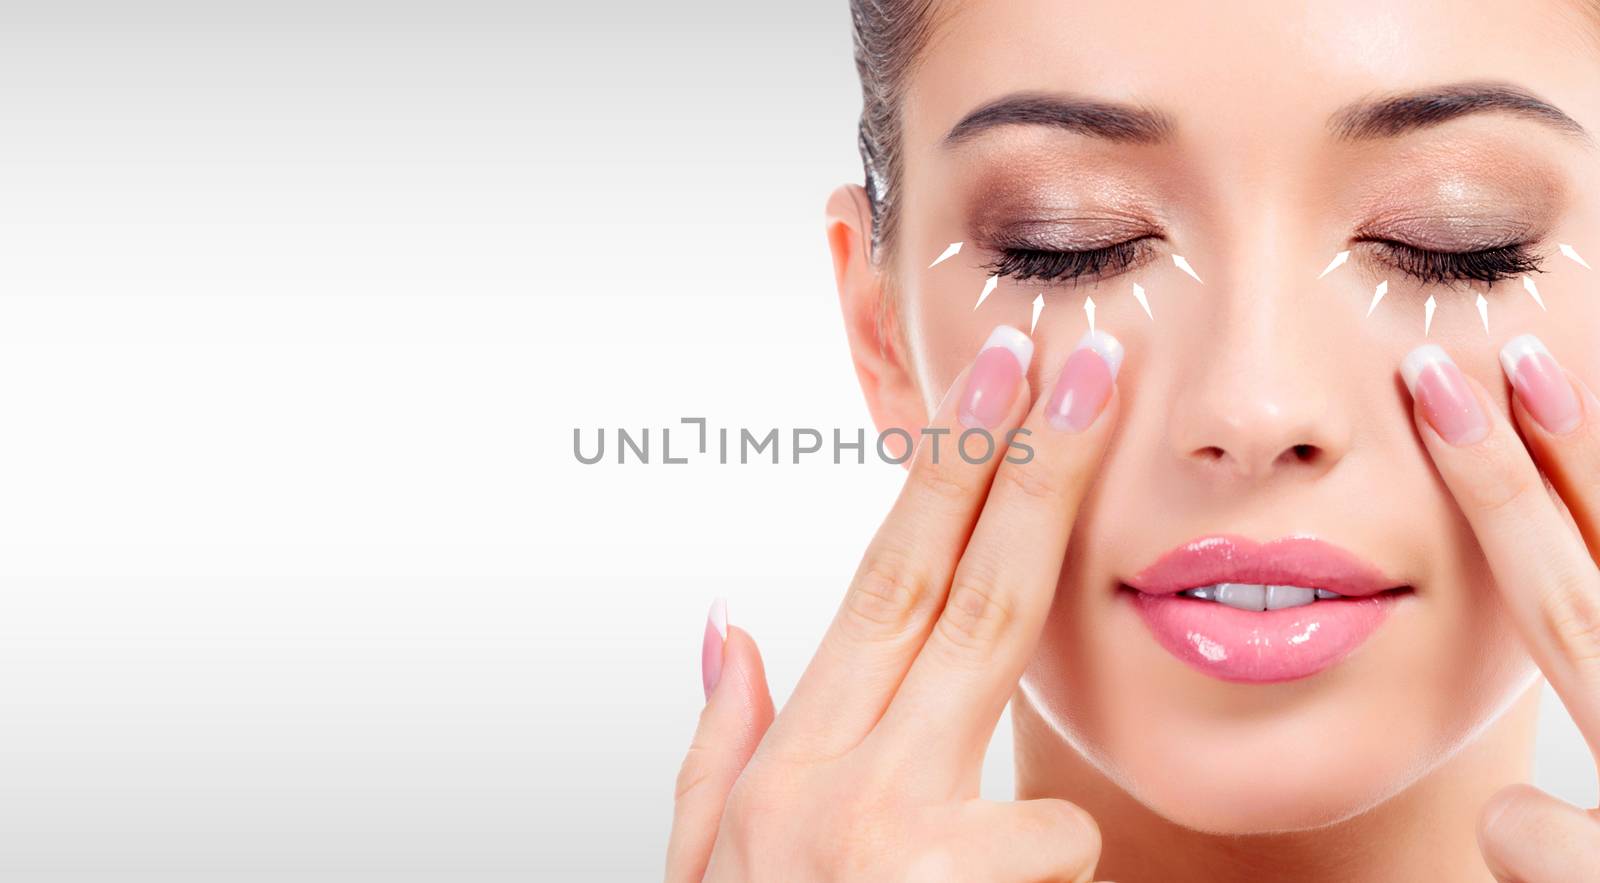 Closeup shot of young beauty woman massaging her face. Facial massage concept. Pretty girl against a grey background with copyspace